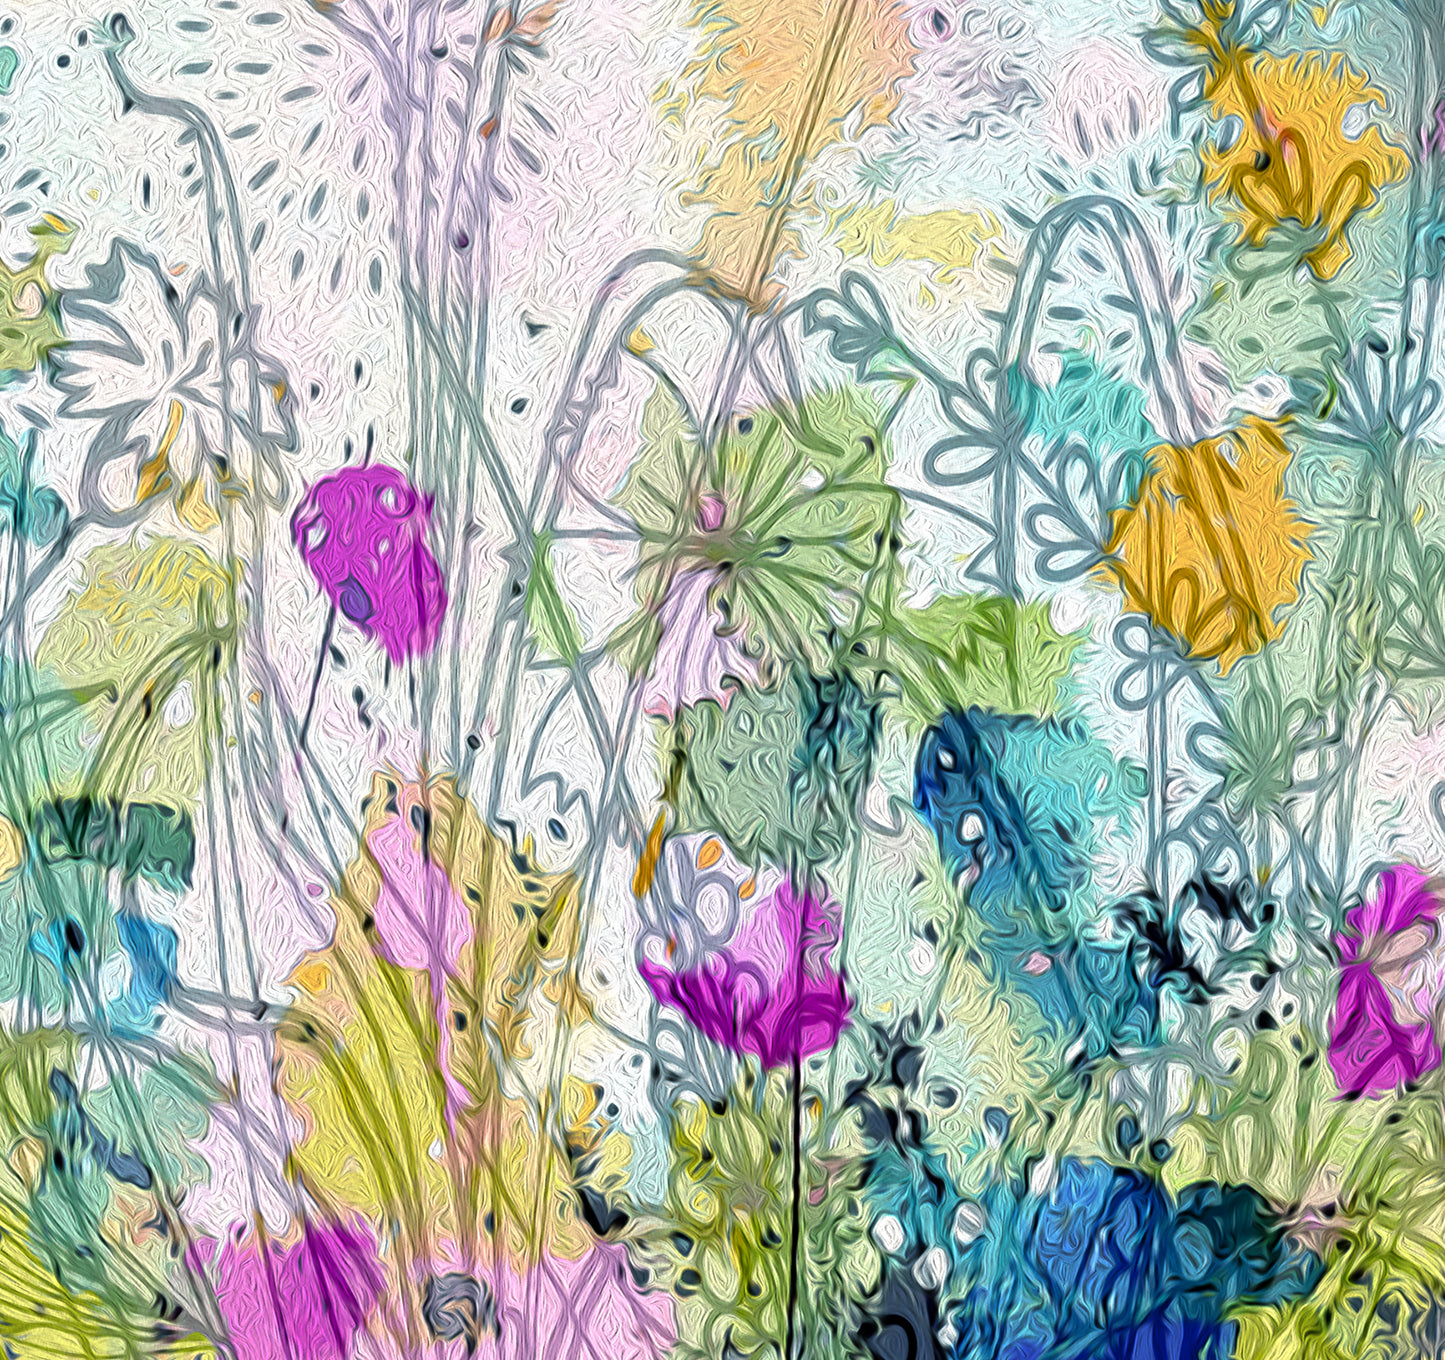 Floral Meadow Art Giclee Print on Stretched Canvas or Paper